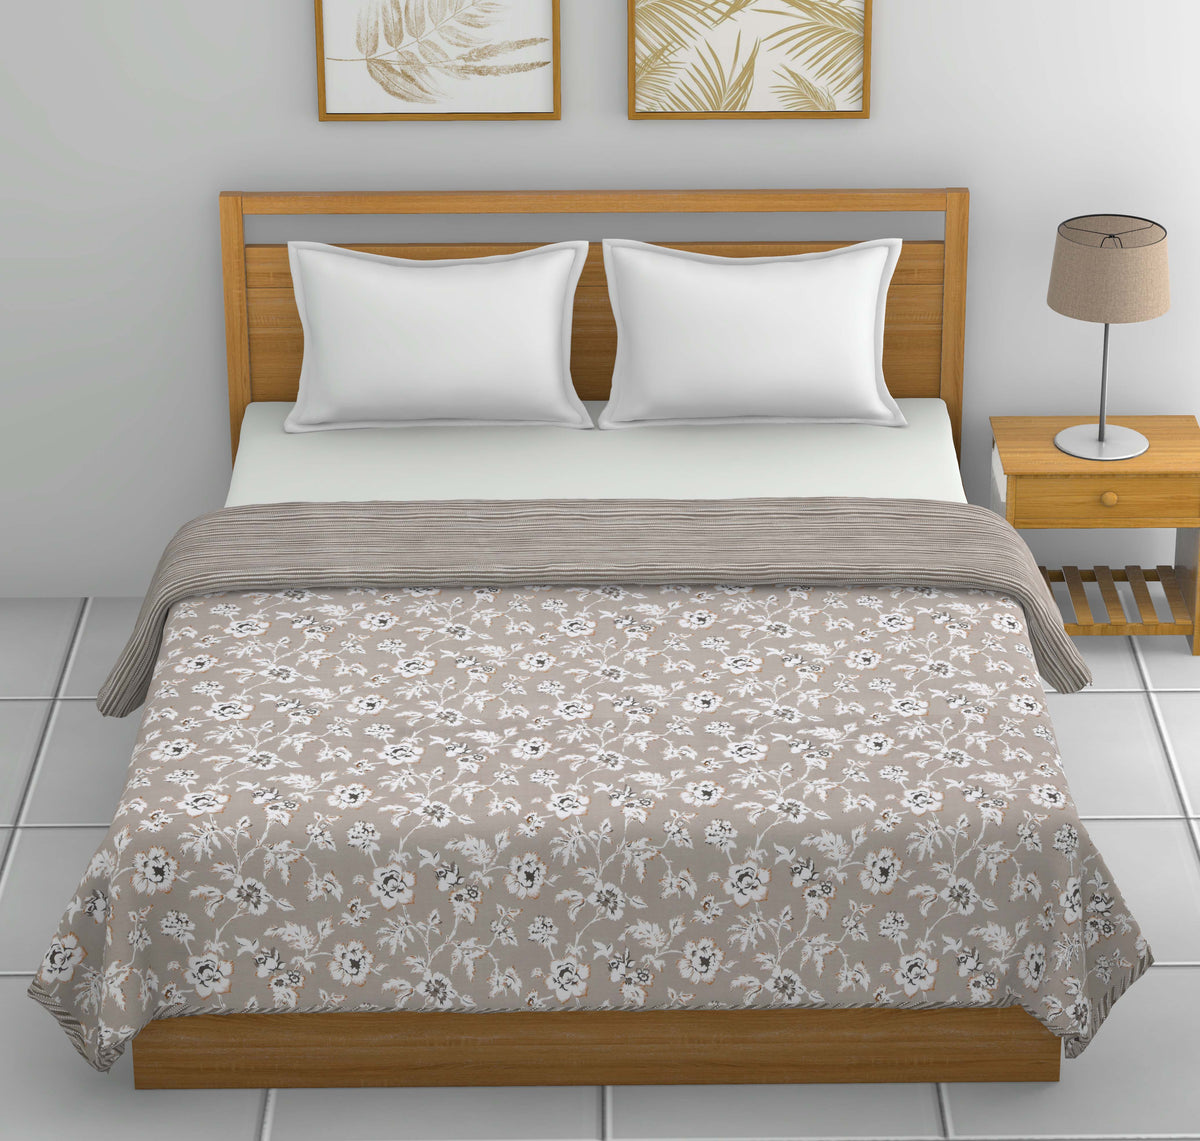 Dohar Cotton-Double Bed- Muddy Brown Flora